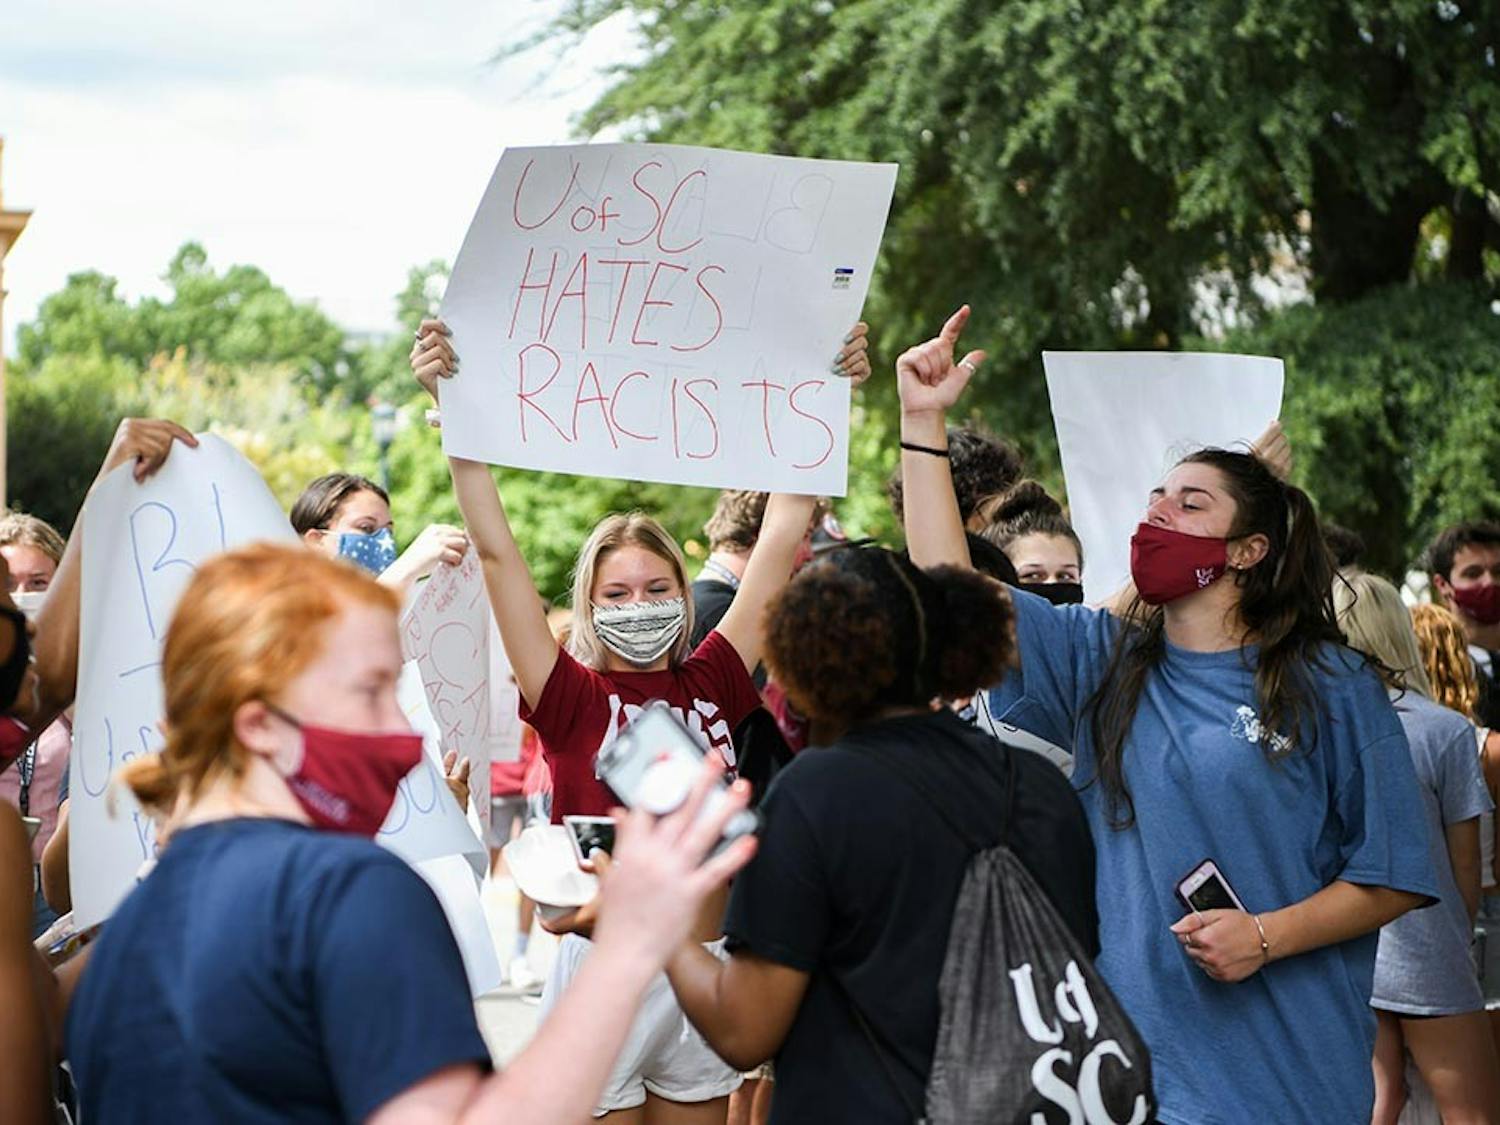 A student holds a sign that says “UofSC hates racists” while protesting Jim Gilles' presence on Greene Street Friday. This was one of many signs that were created on Greene Street after one person brought supplies.